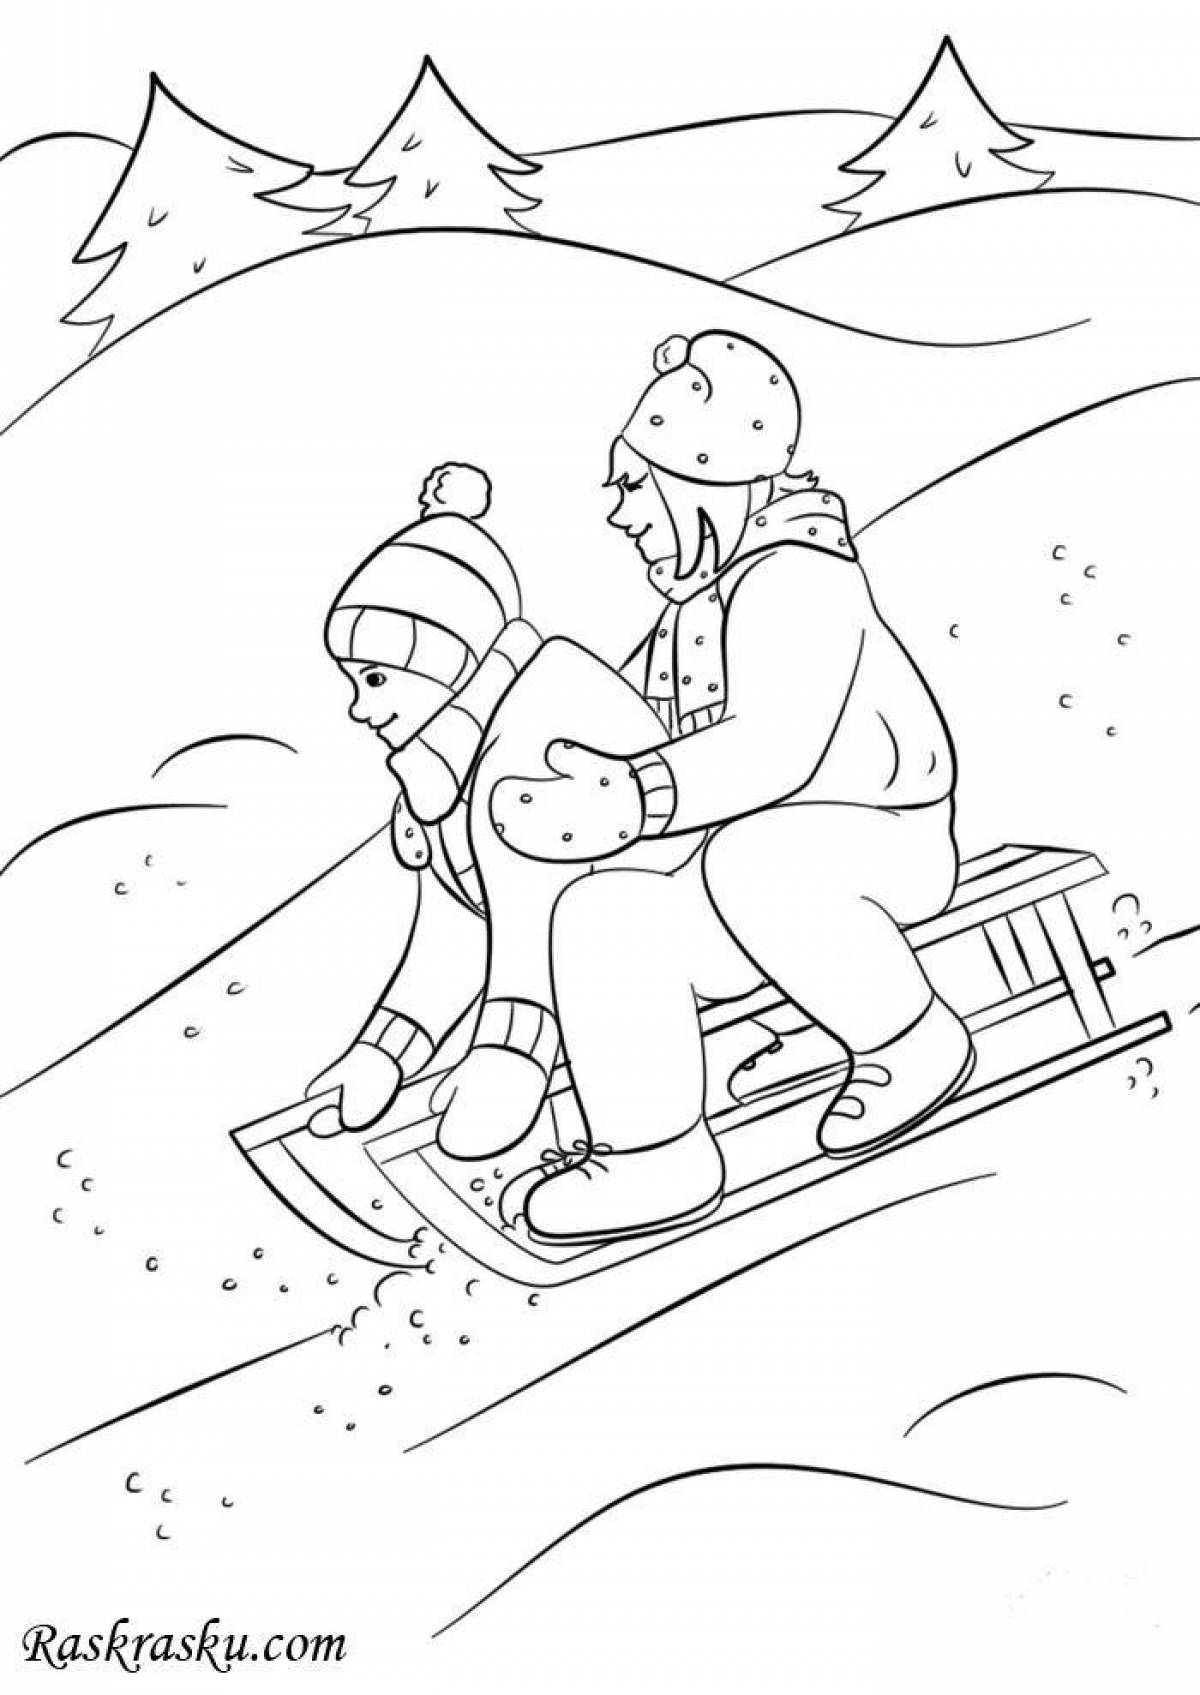 Children's coloring for children on a sled